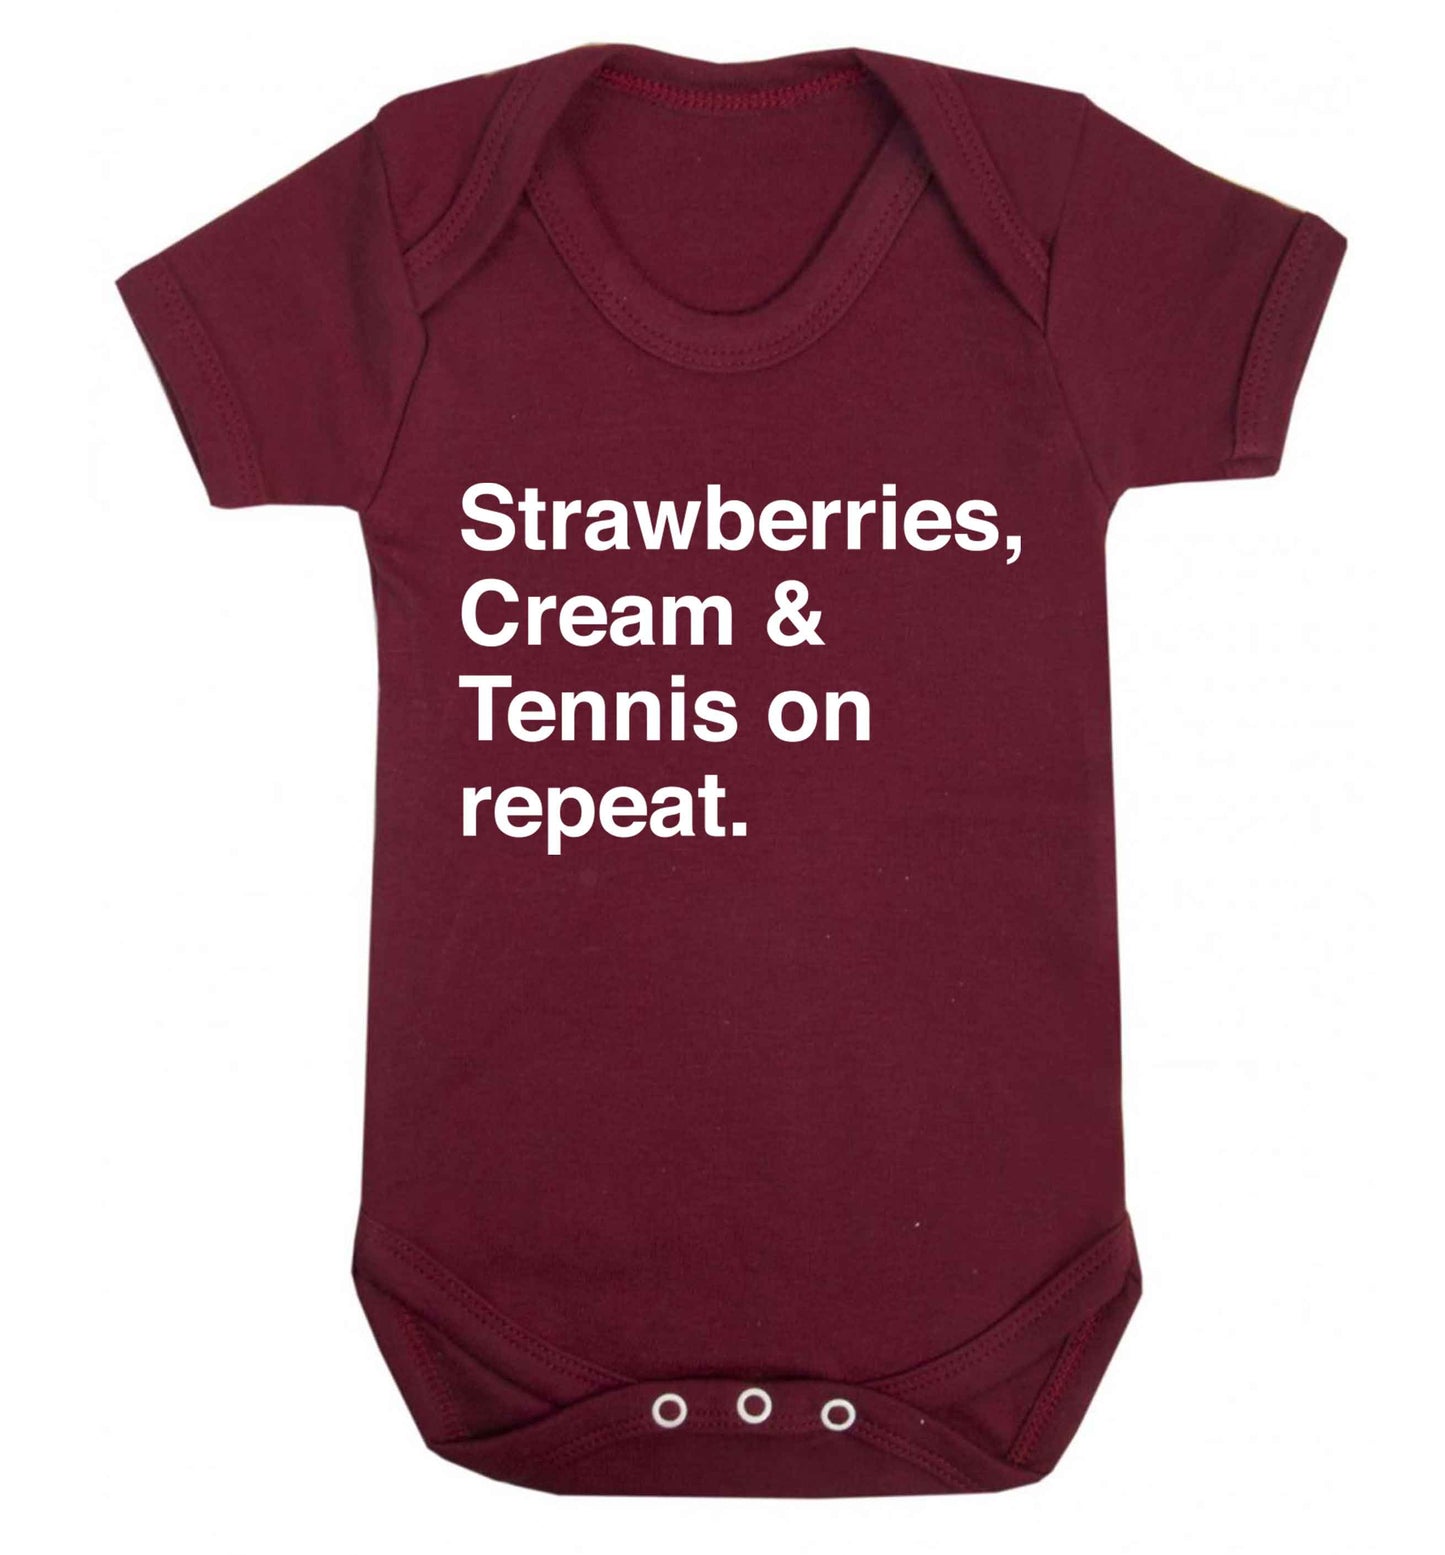 Strawberries, cream and tennis on repeat Baby Vest maroon 18-24 months